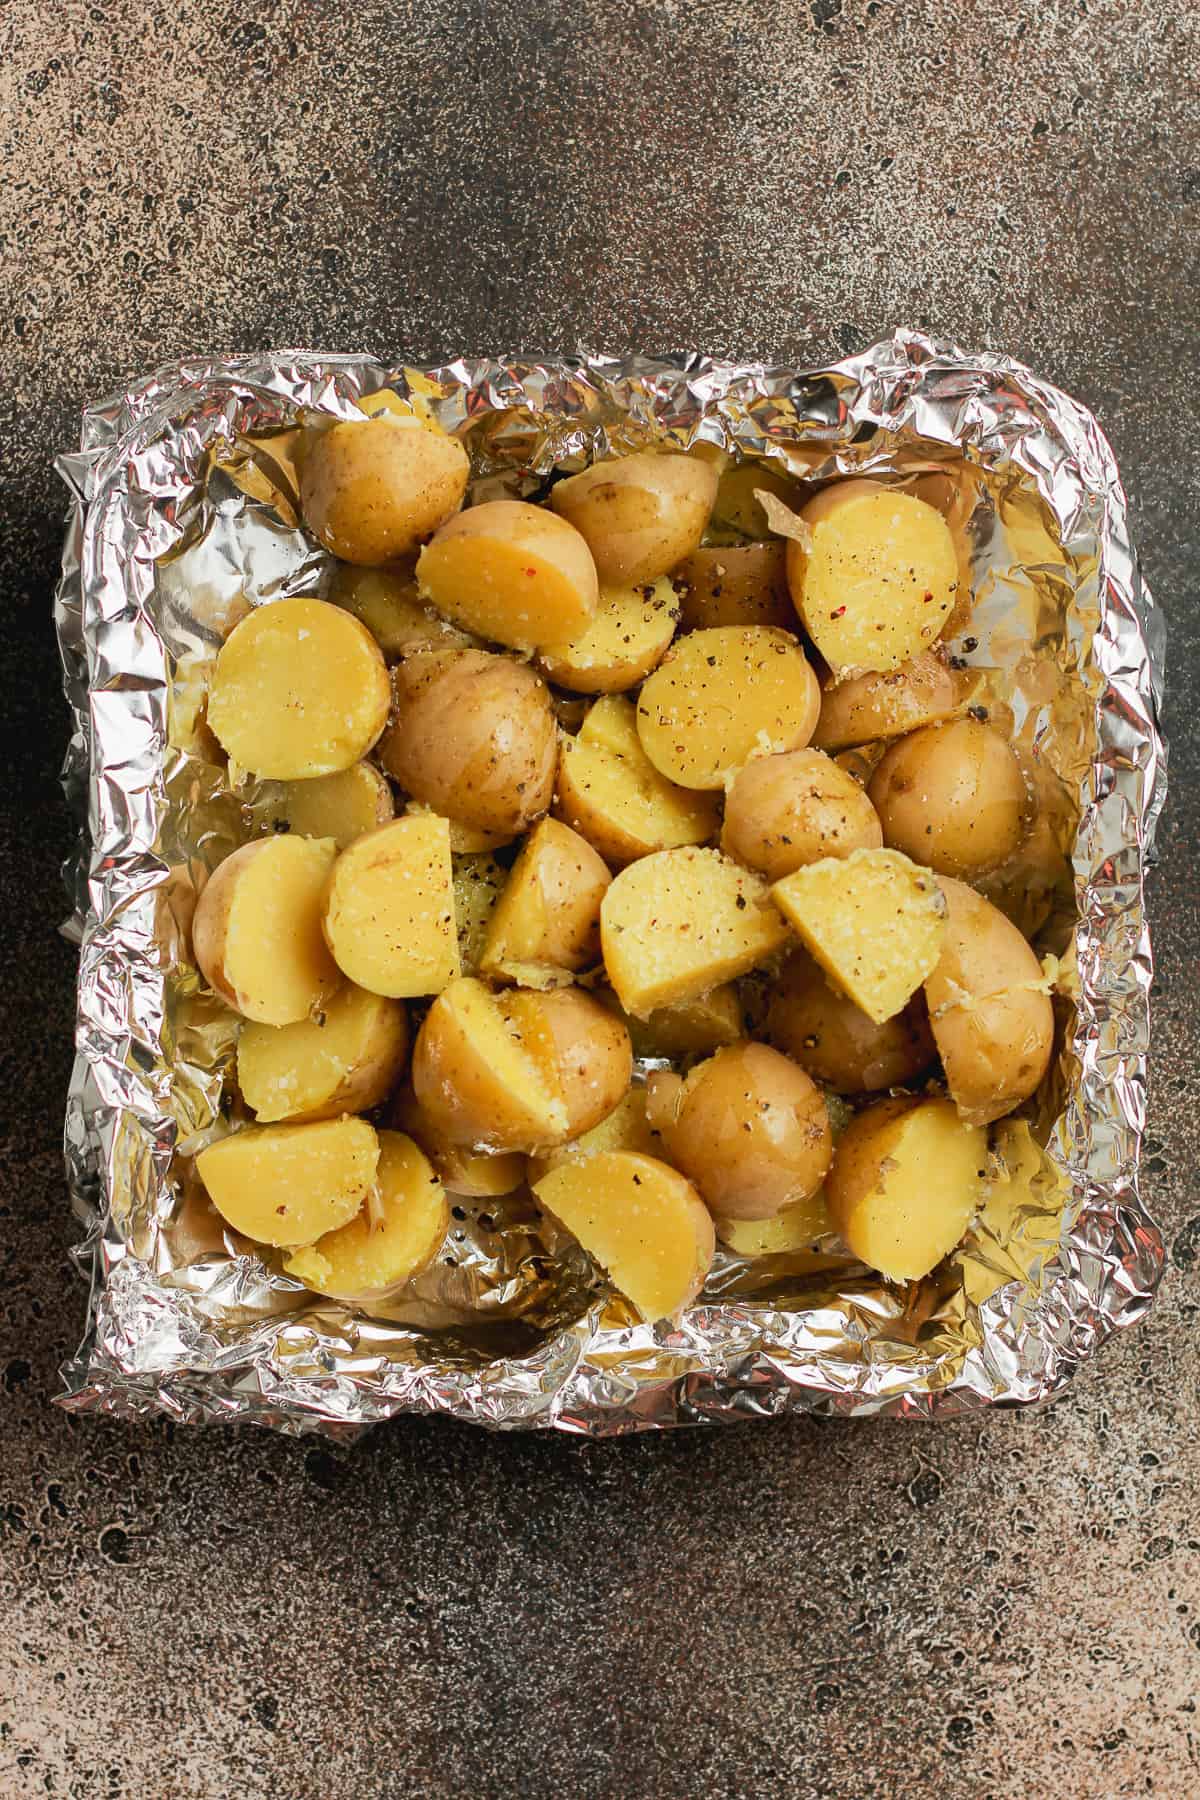 A tin of the boiled and halved baby potatoes.